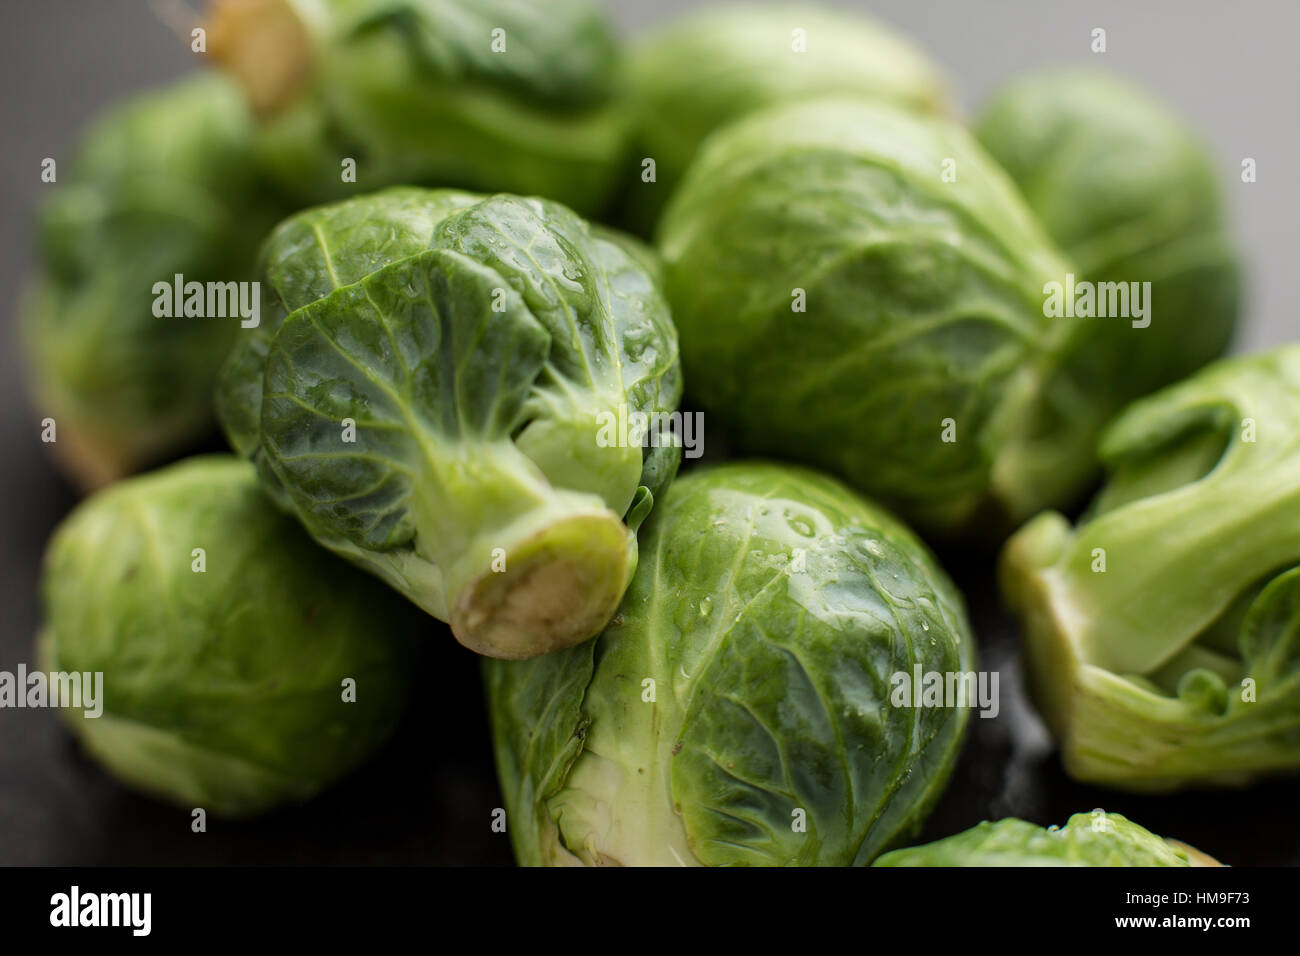 a close-up angle on a pile of organic brussels sprouts Stock Photo